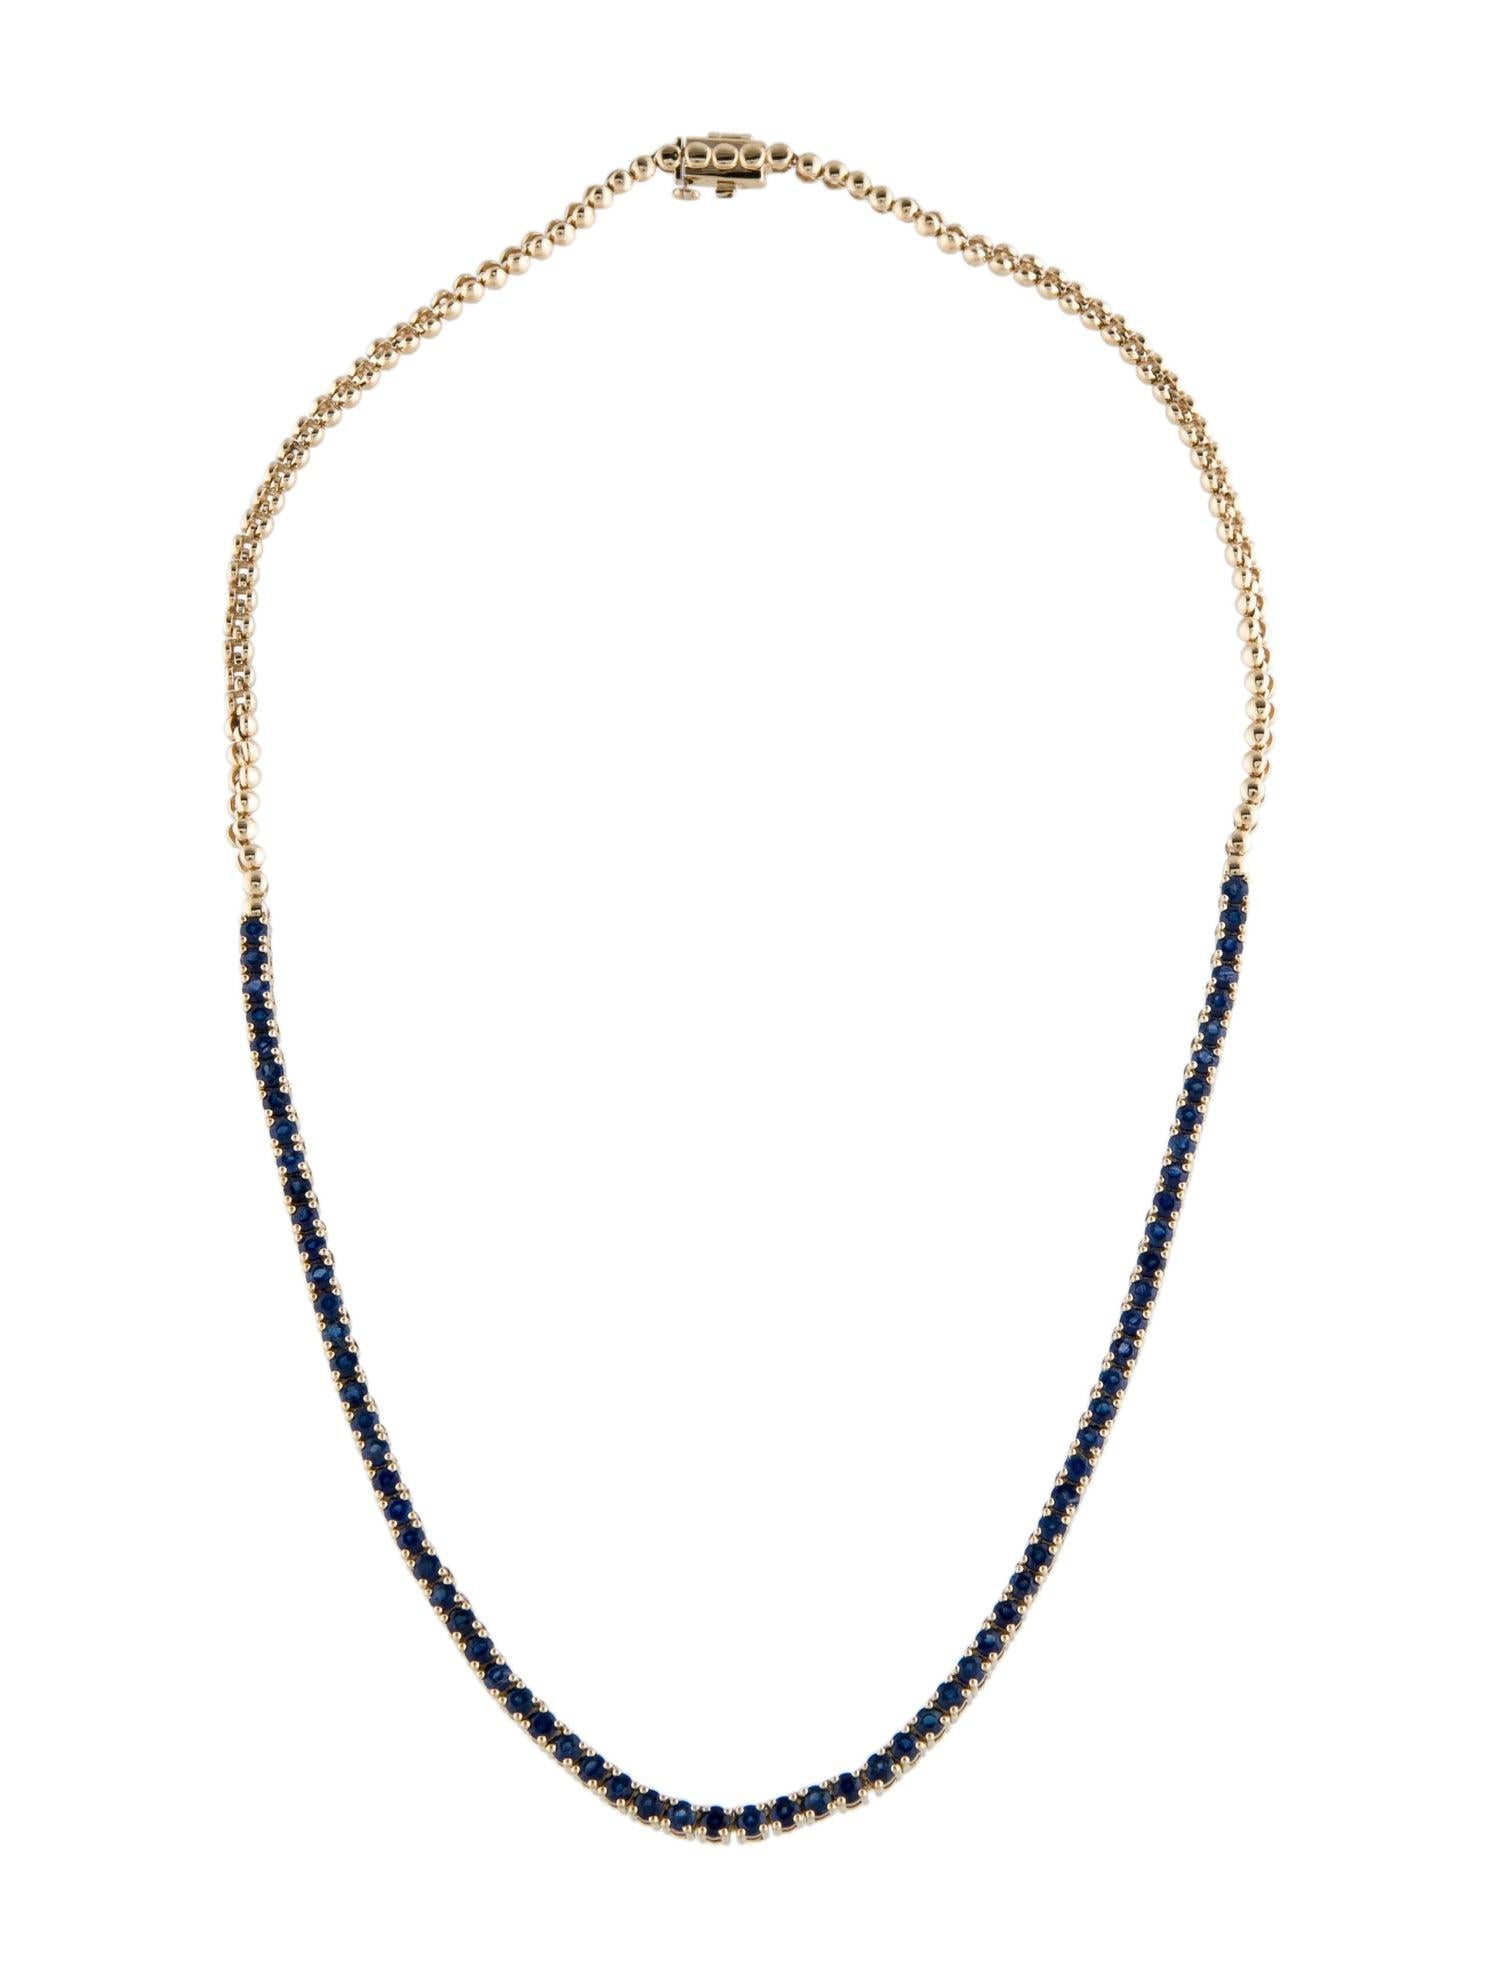 14K Sapphire Chain Necklace 7.03ctw  Stunning Jewelry Piece for Elegance In New Condition For Sale In Holtsville, NY